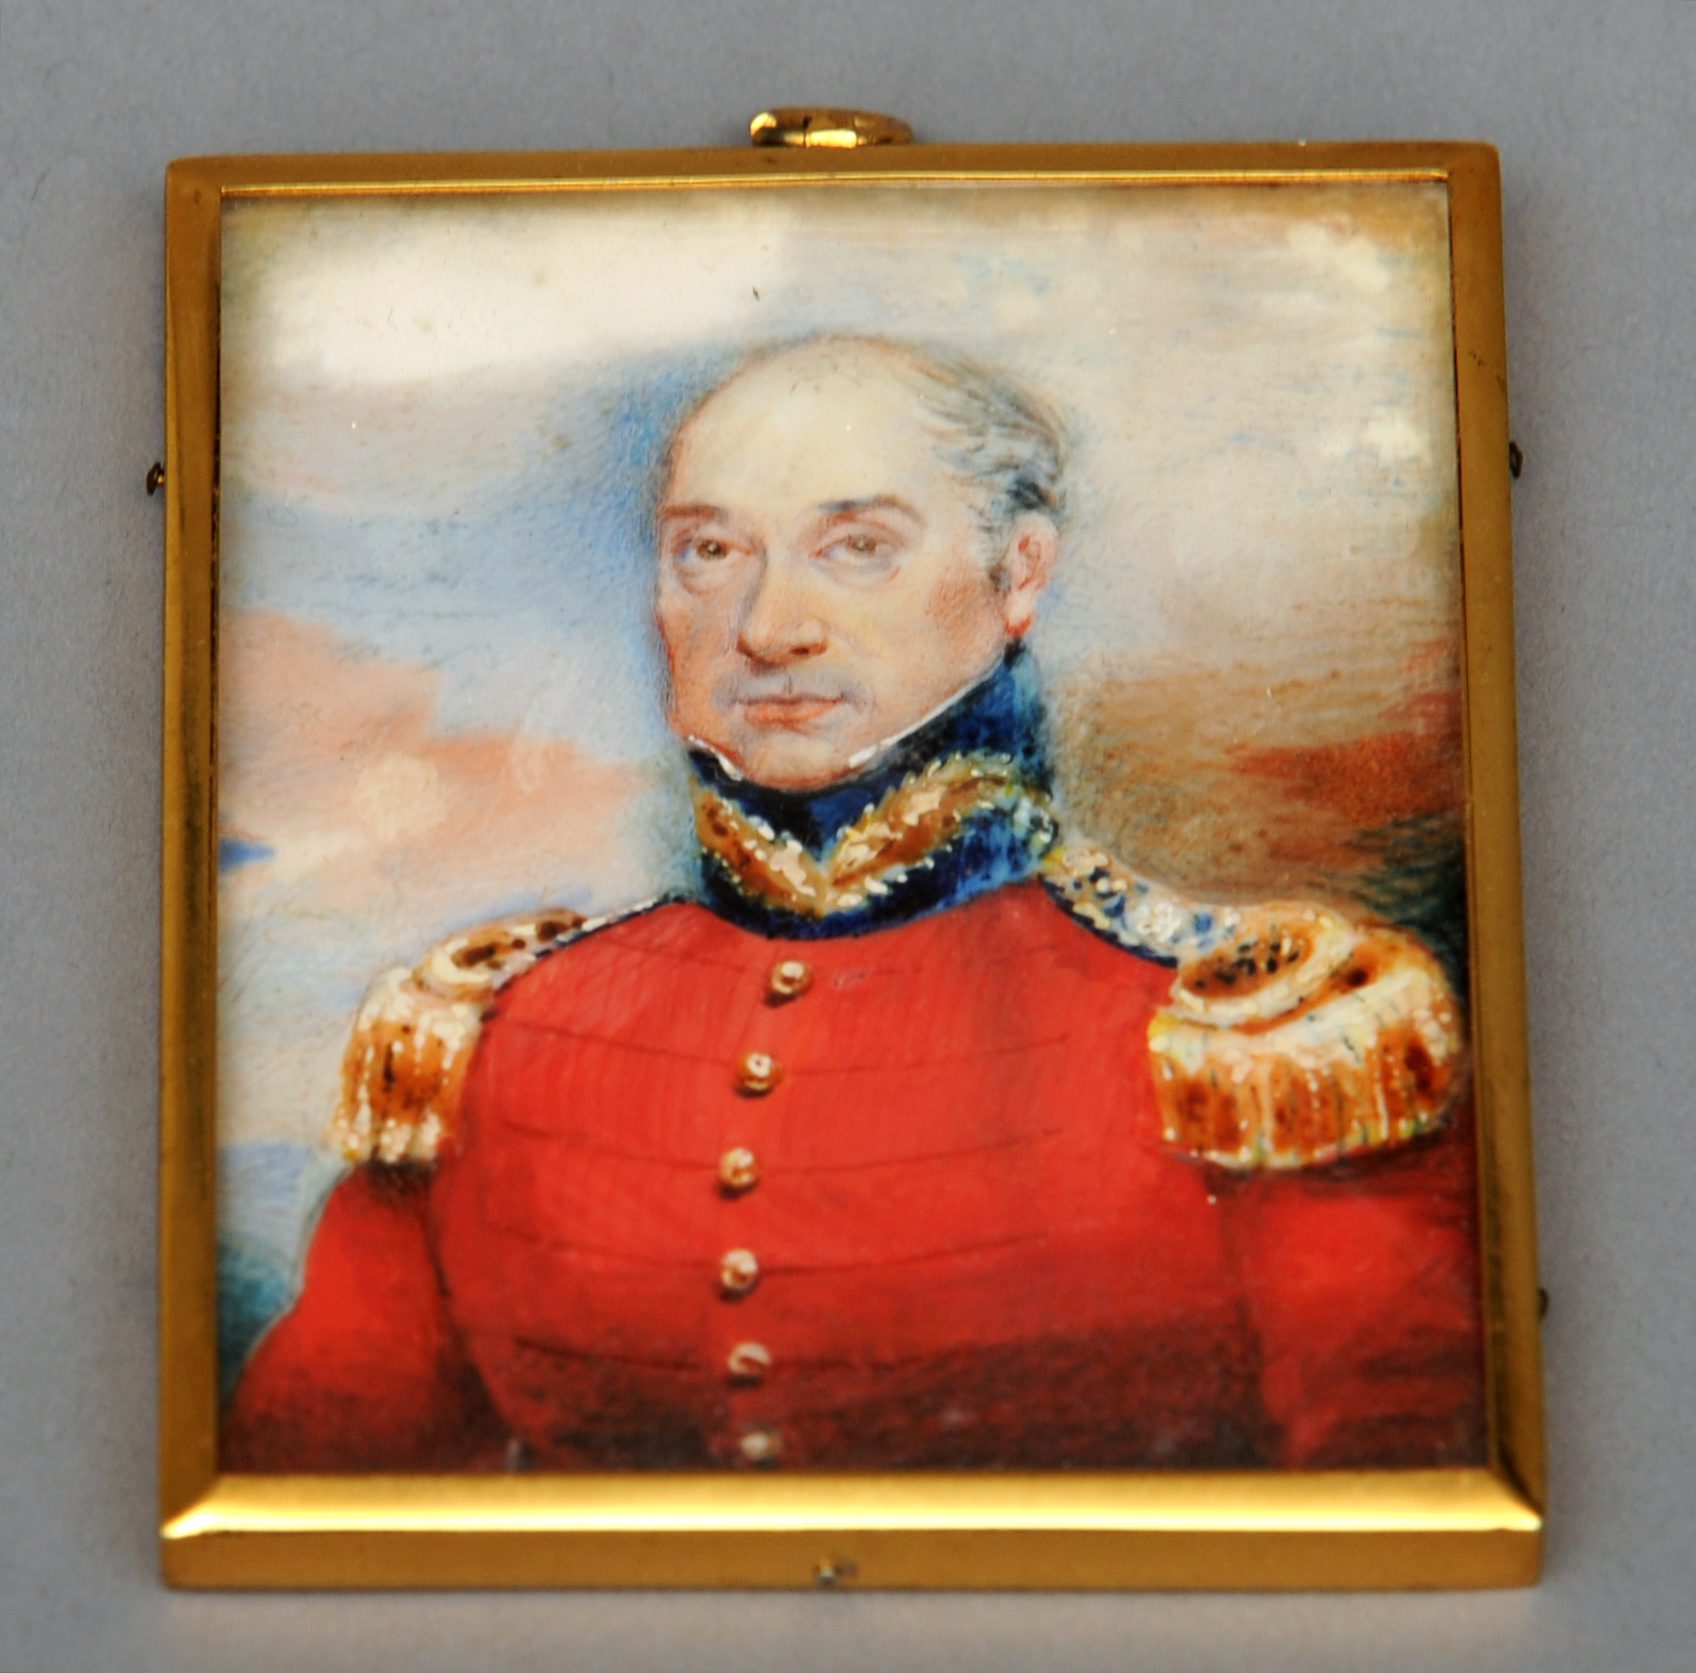 An English 19th century portrait miniature of an officer, in scarlet uniform with gold epaulettes On